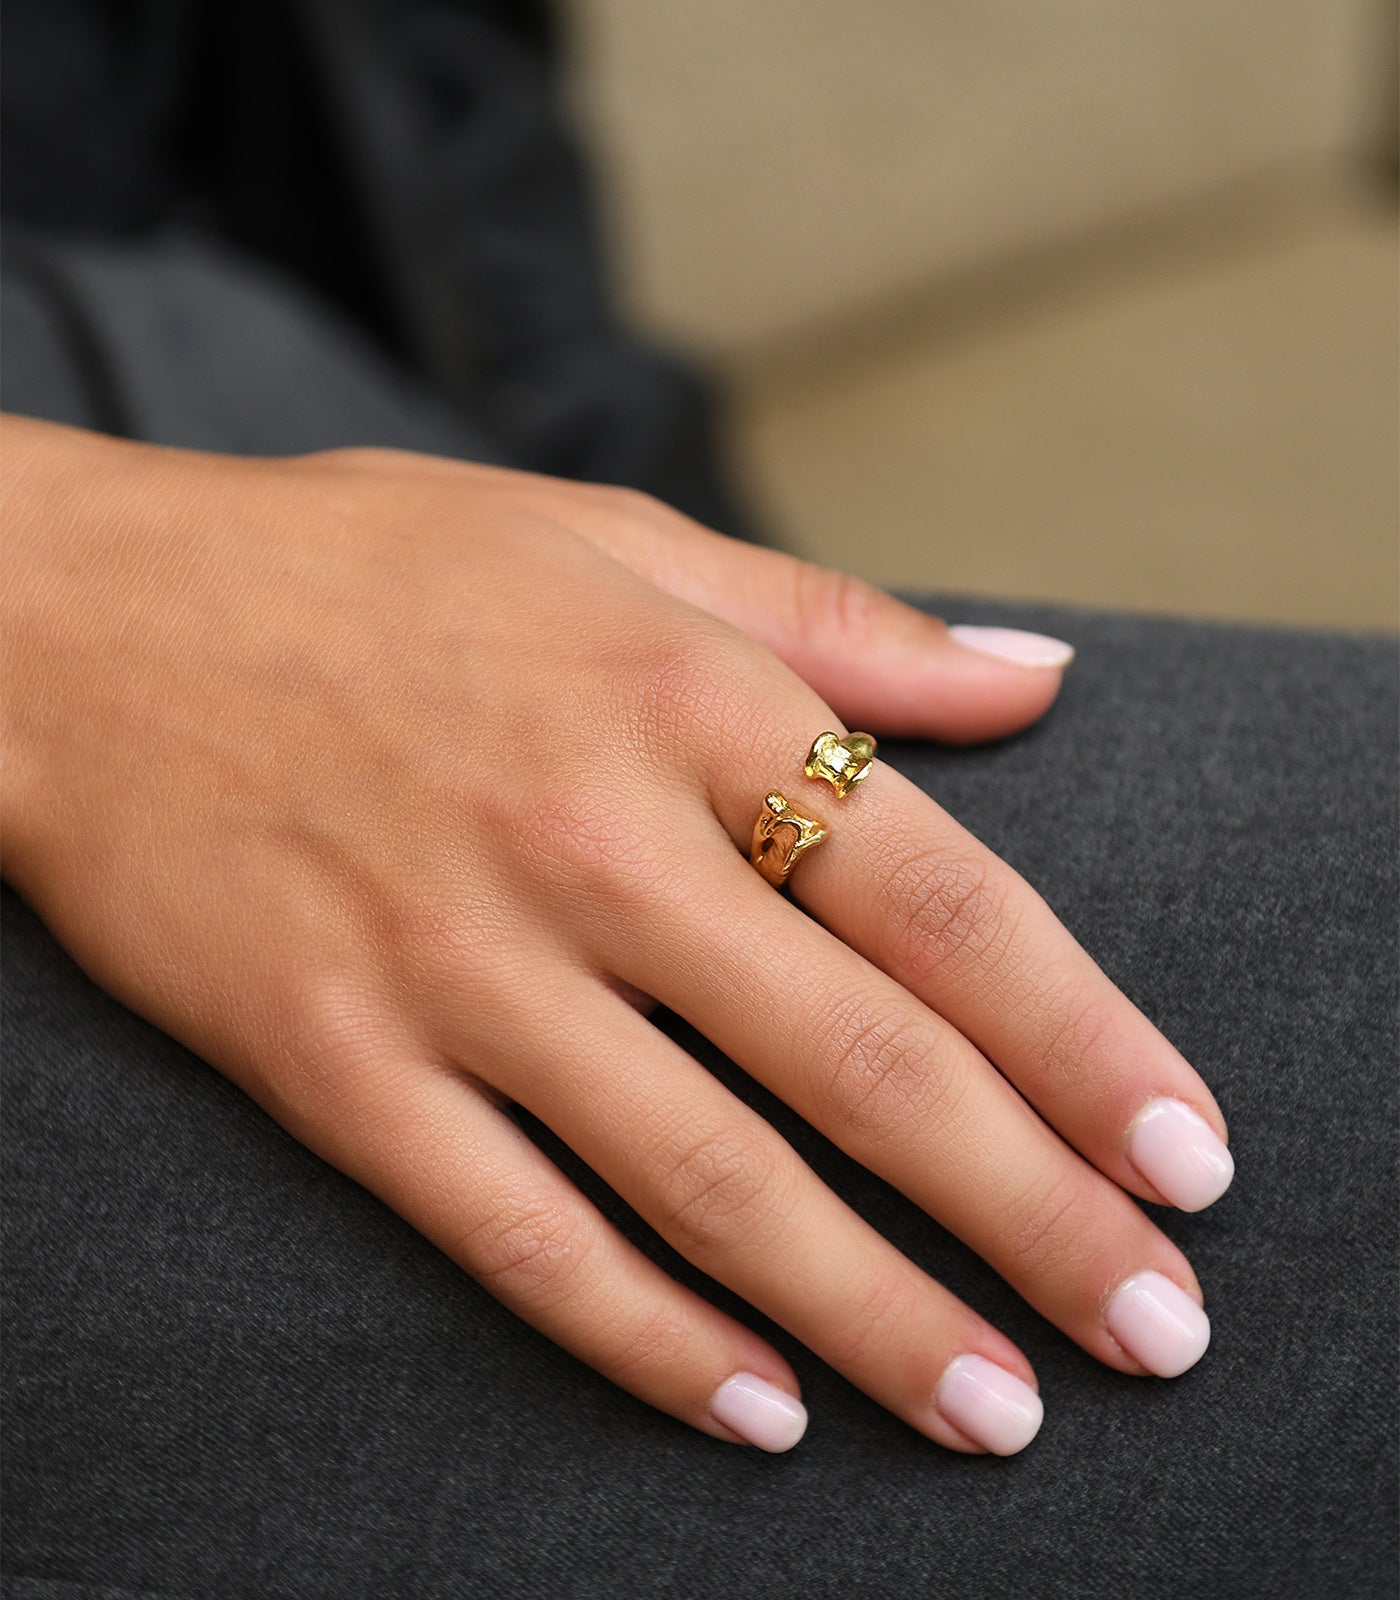 A model wears a gold vermeil, open band ring. The ring has a bone detailing at the end of each side of the band.